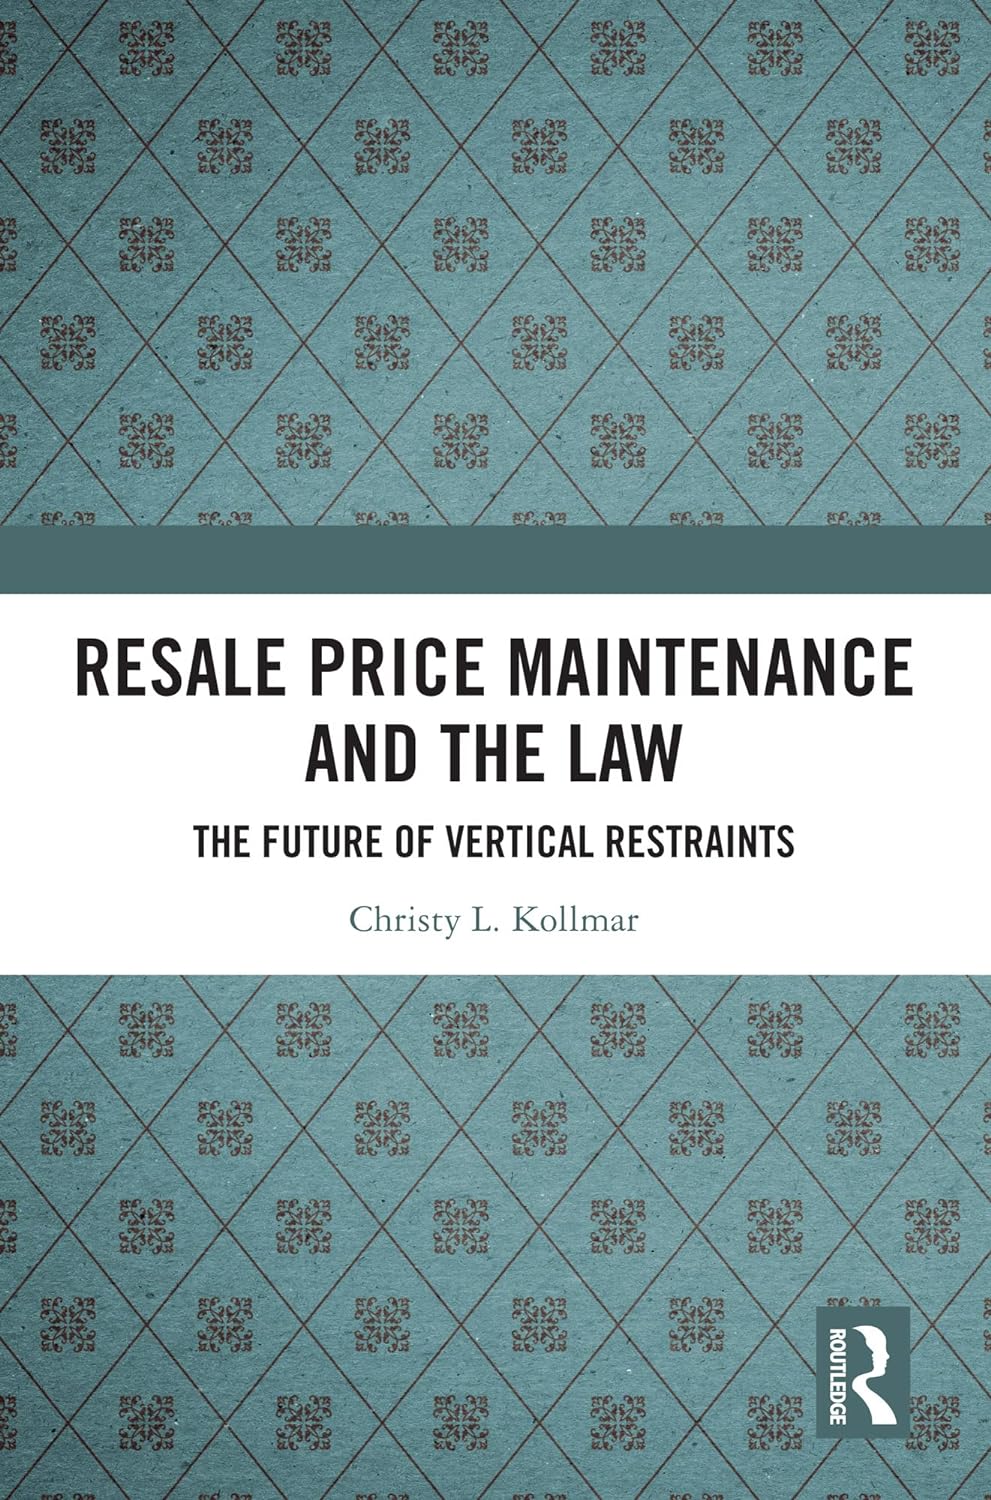 Resale price maintenance and the law : the future of vertical restraints